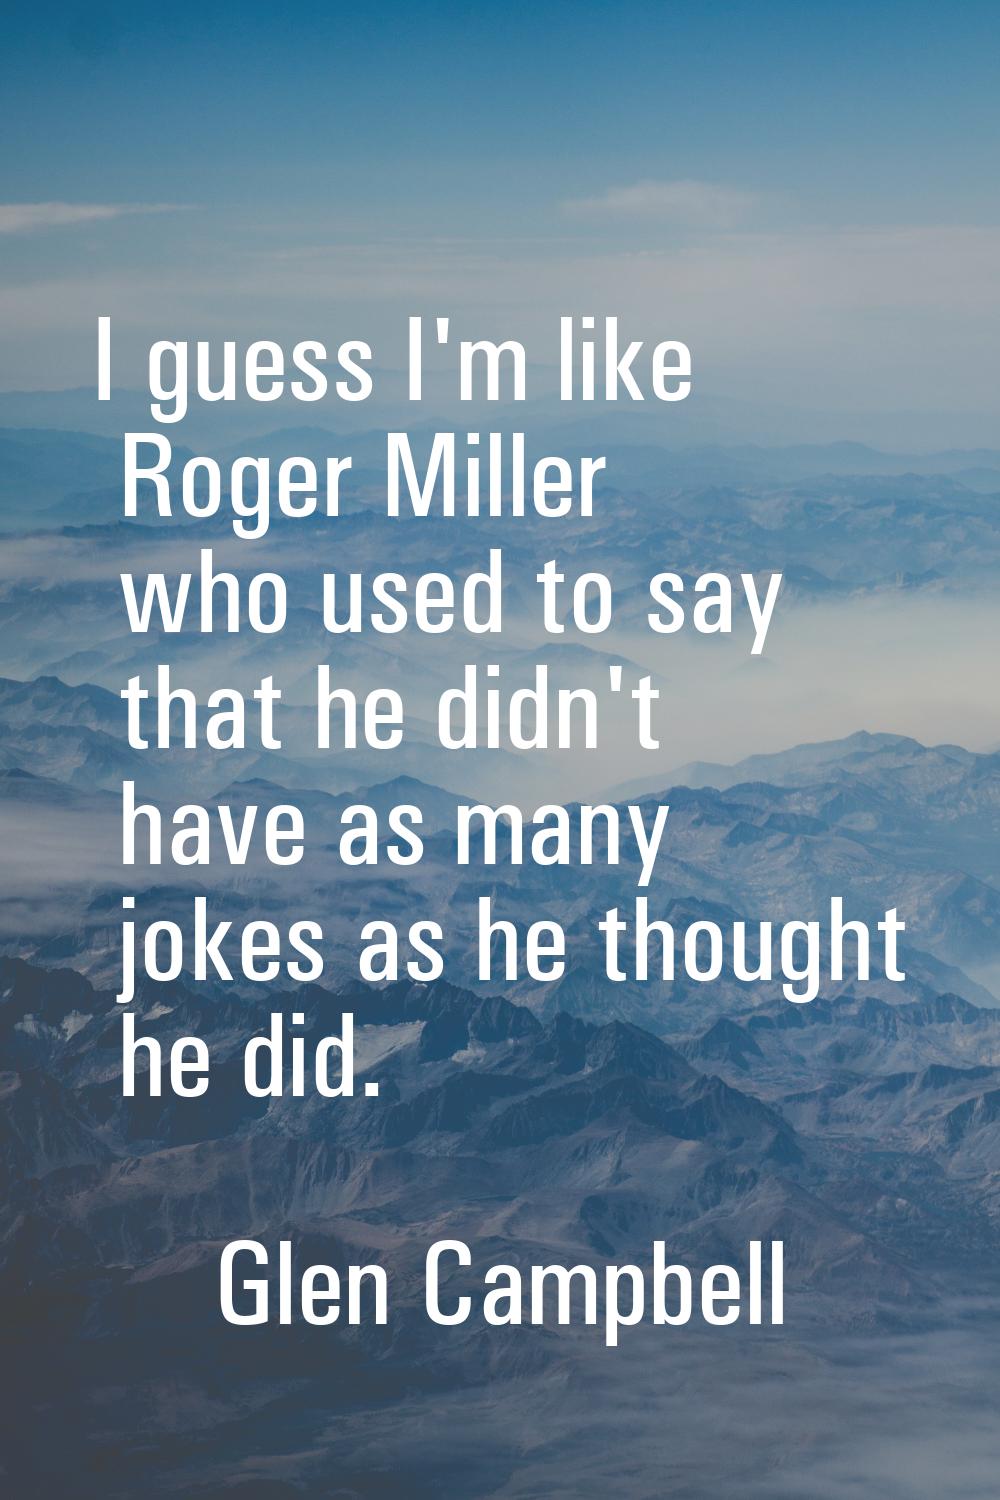 I guess I'm like Roger Miller who used to say that he didn't have as many jokes as he thought he di